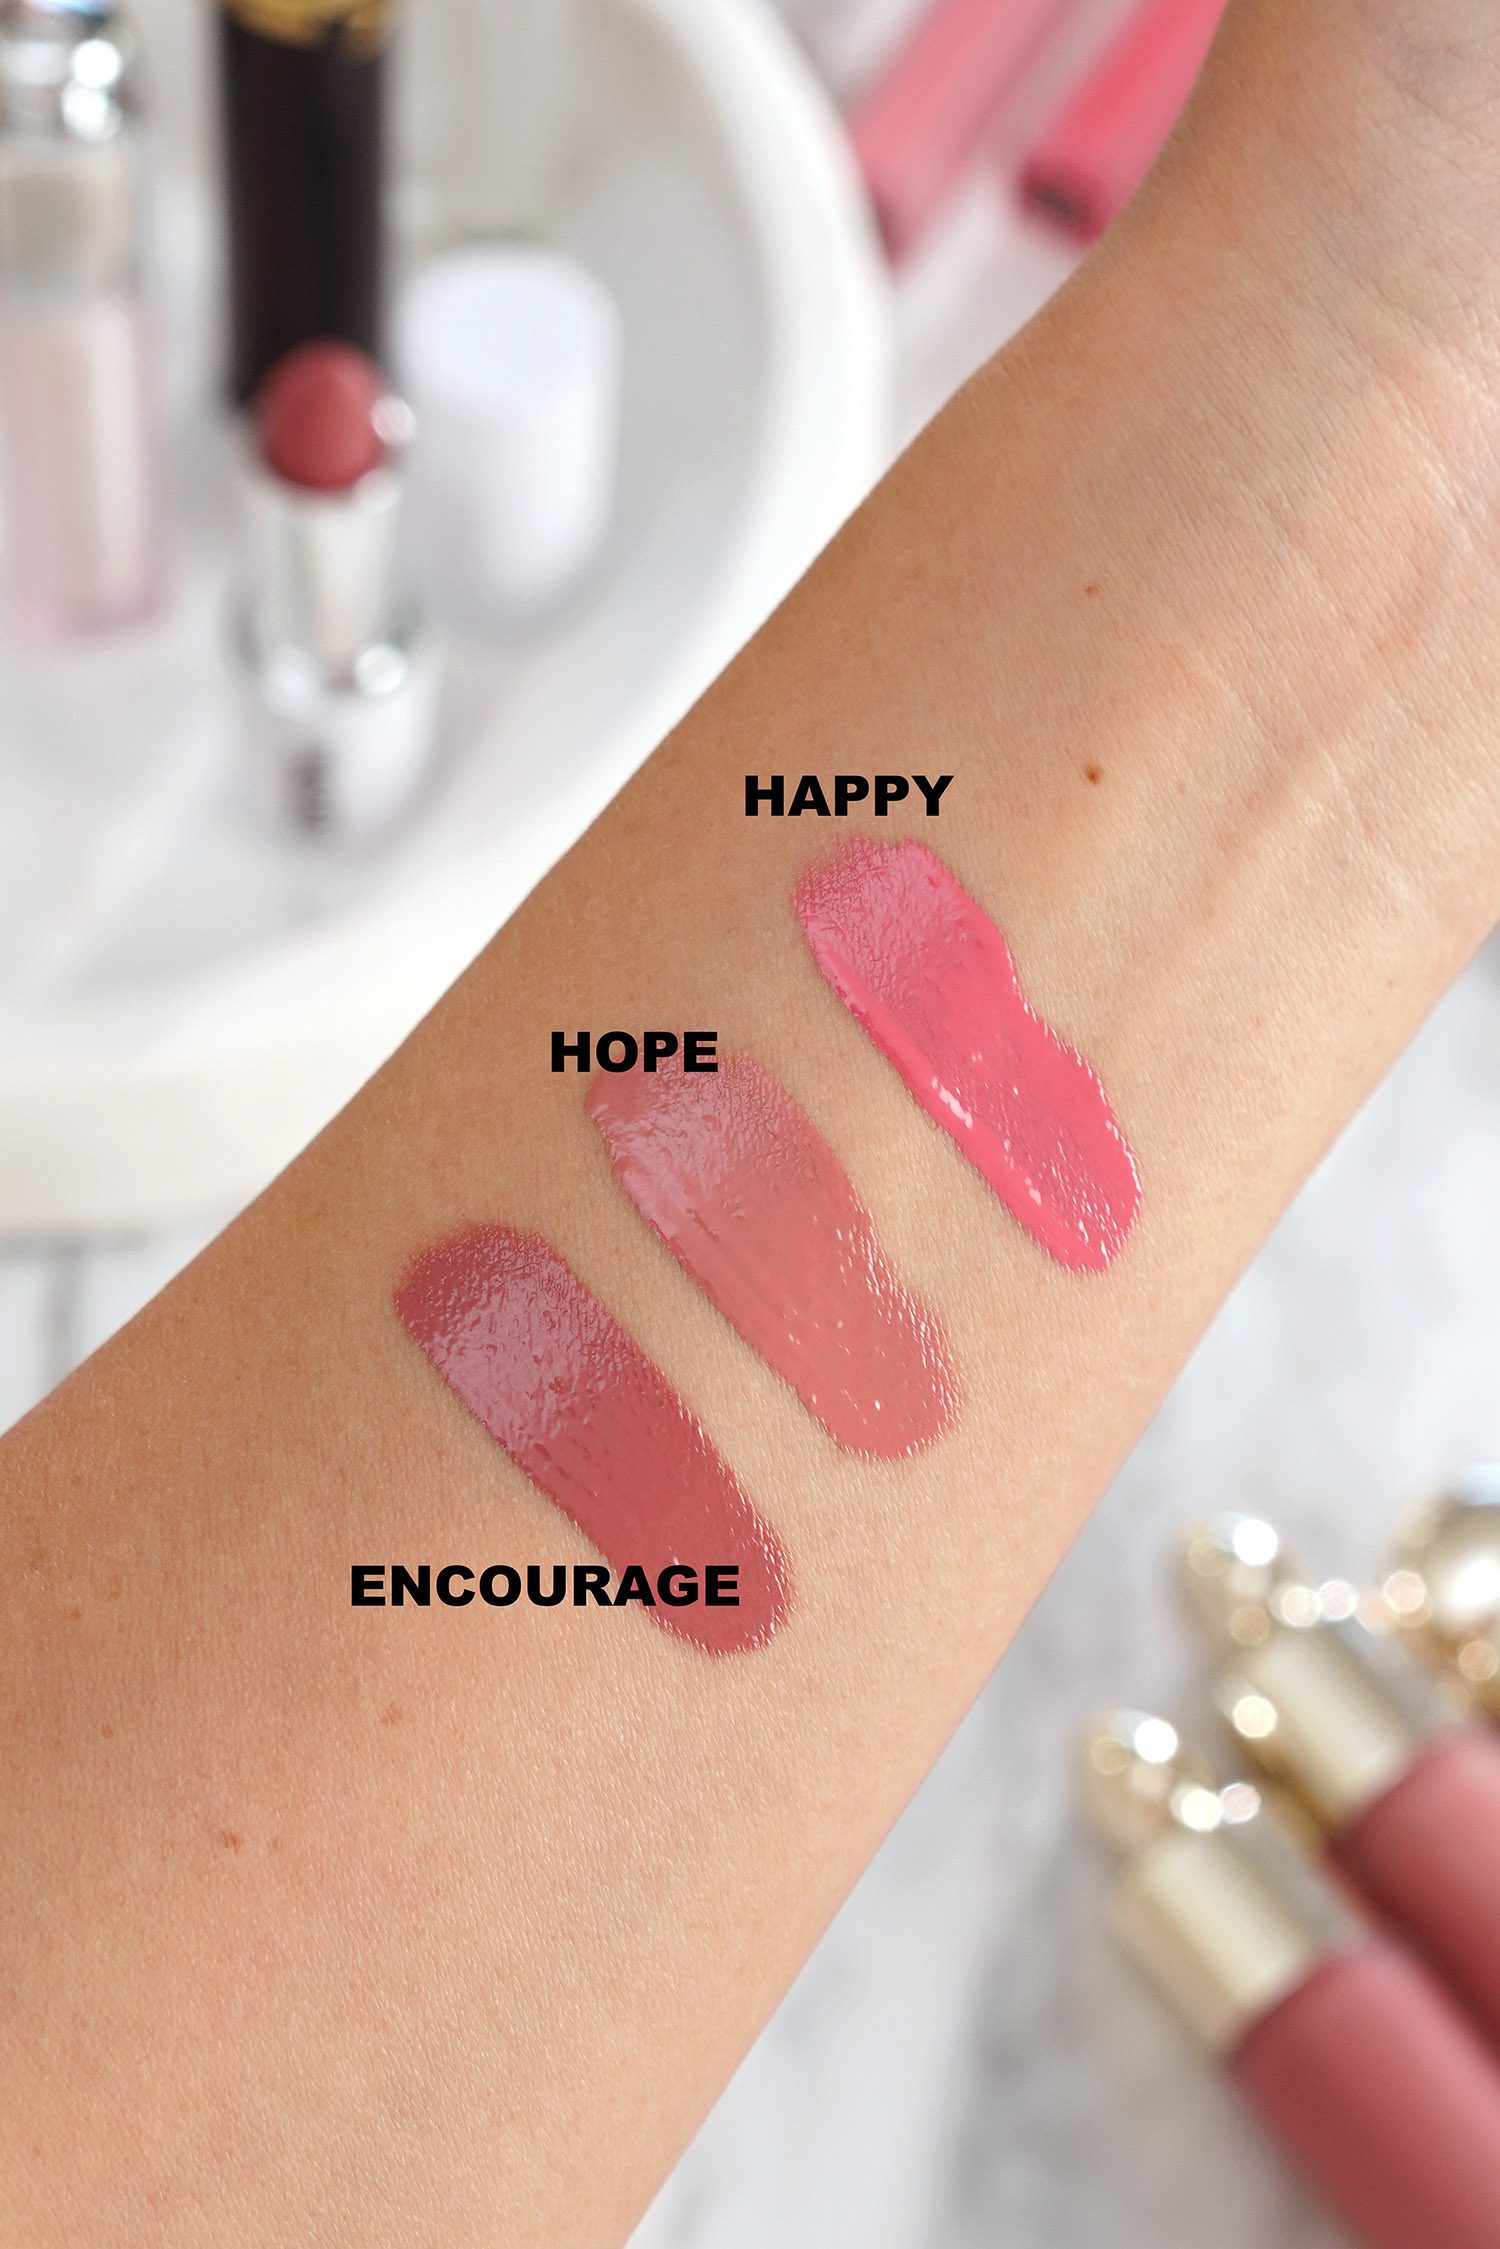 Rare Beauty Encourage Soft Pinch Liquid Blush Review Swatches Fre My Xxx Hot Girl